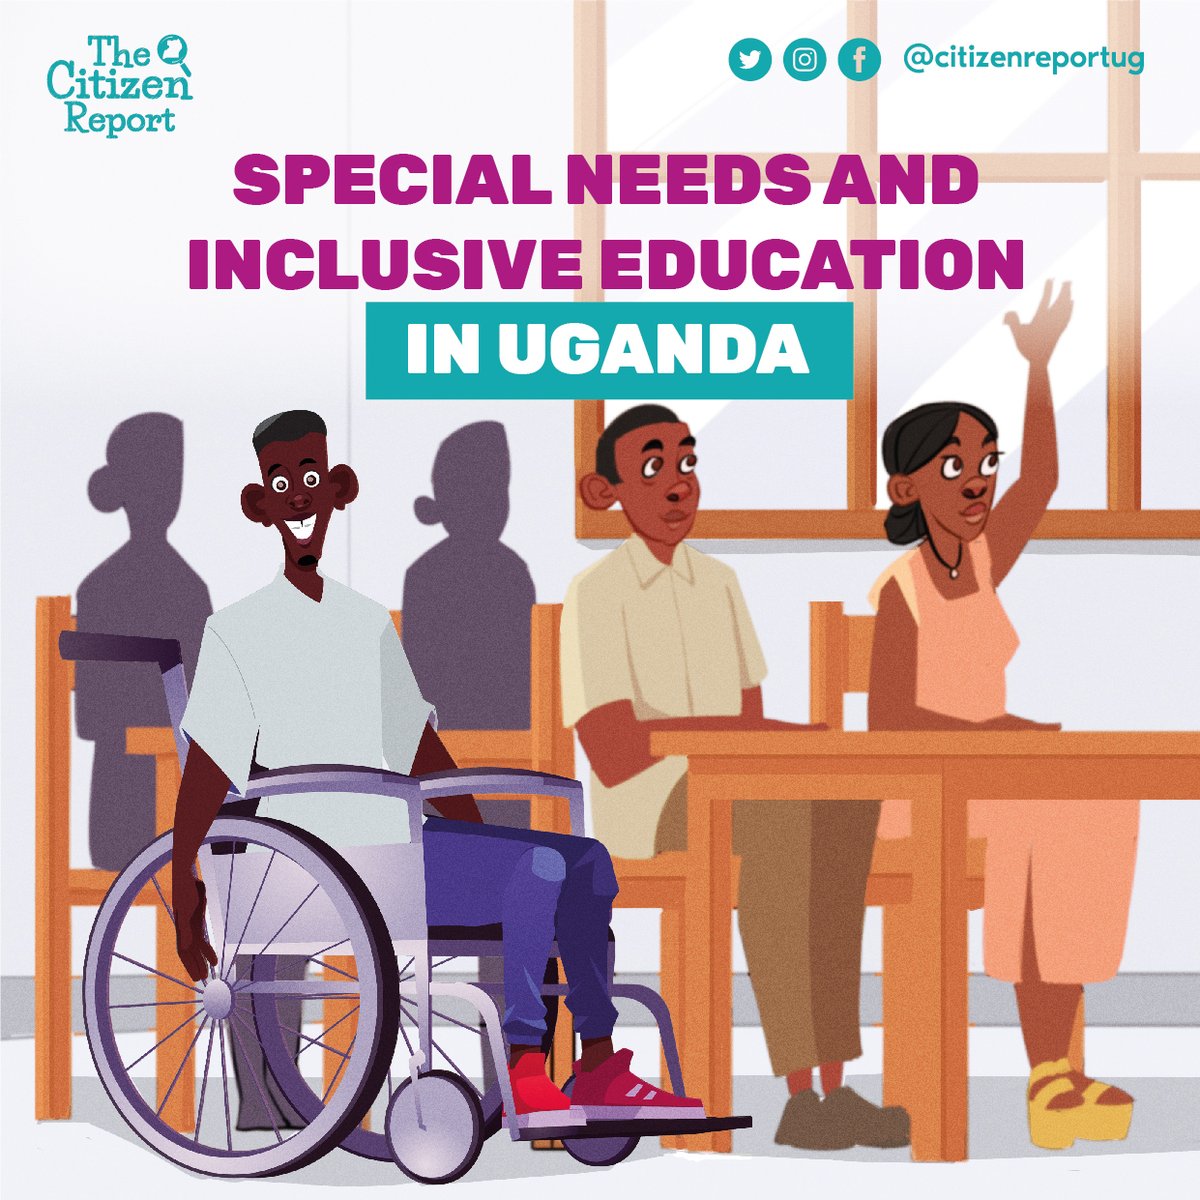 The Constitution of Uganda requires the Parliament to create laws protecting people with disabilities. In 2019, they passed the Persons with Disabilities Act. This law prohibits discrimination against people with disabilities in all spheres, including education. Such